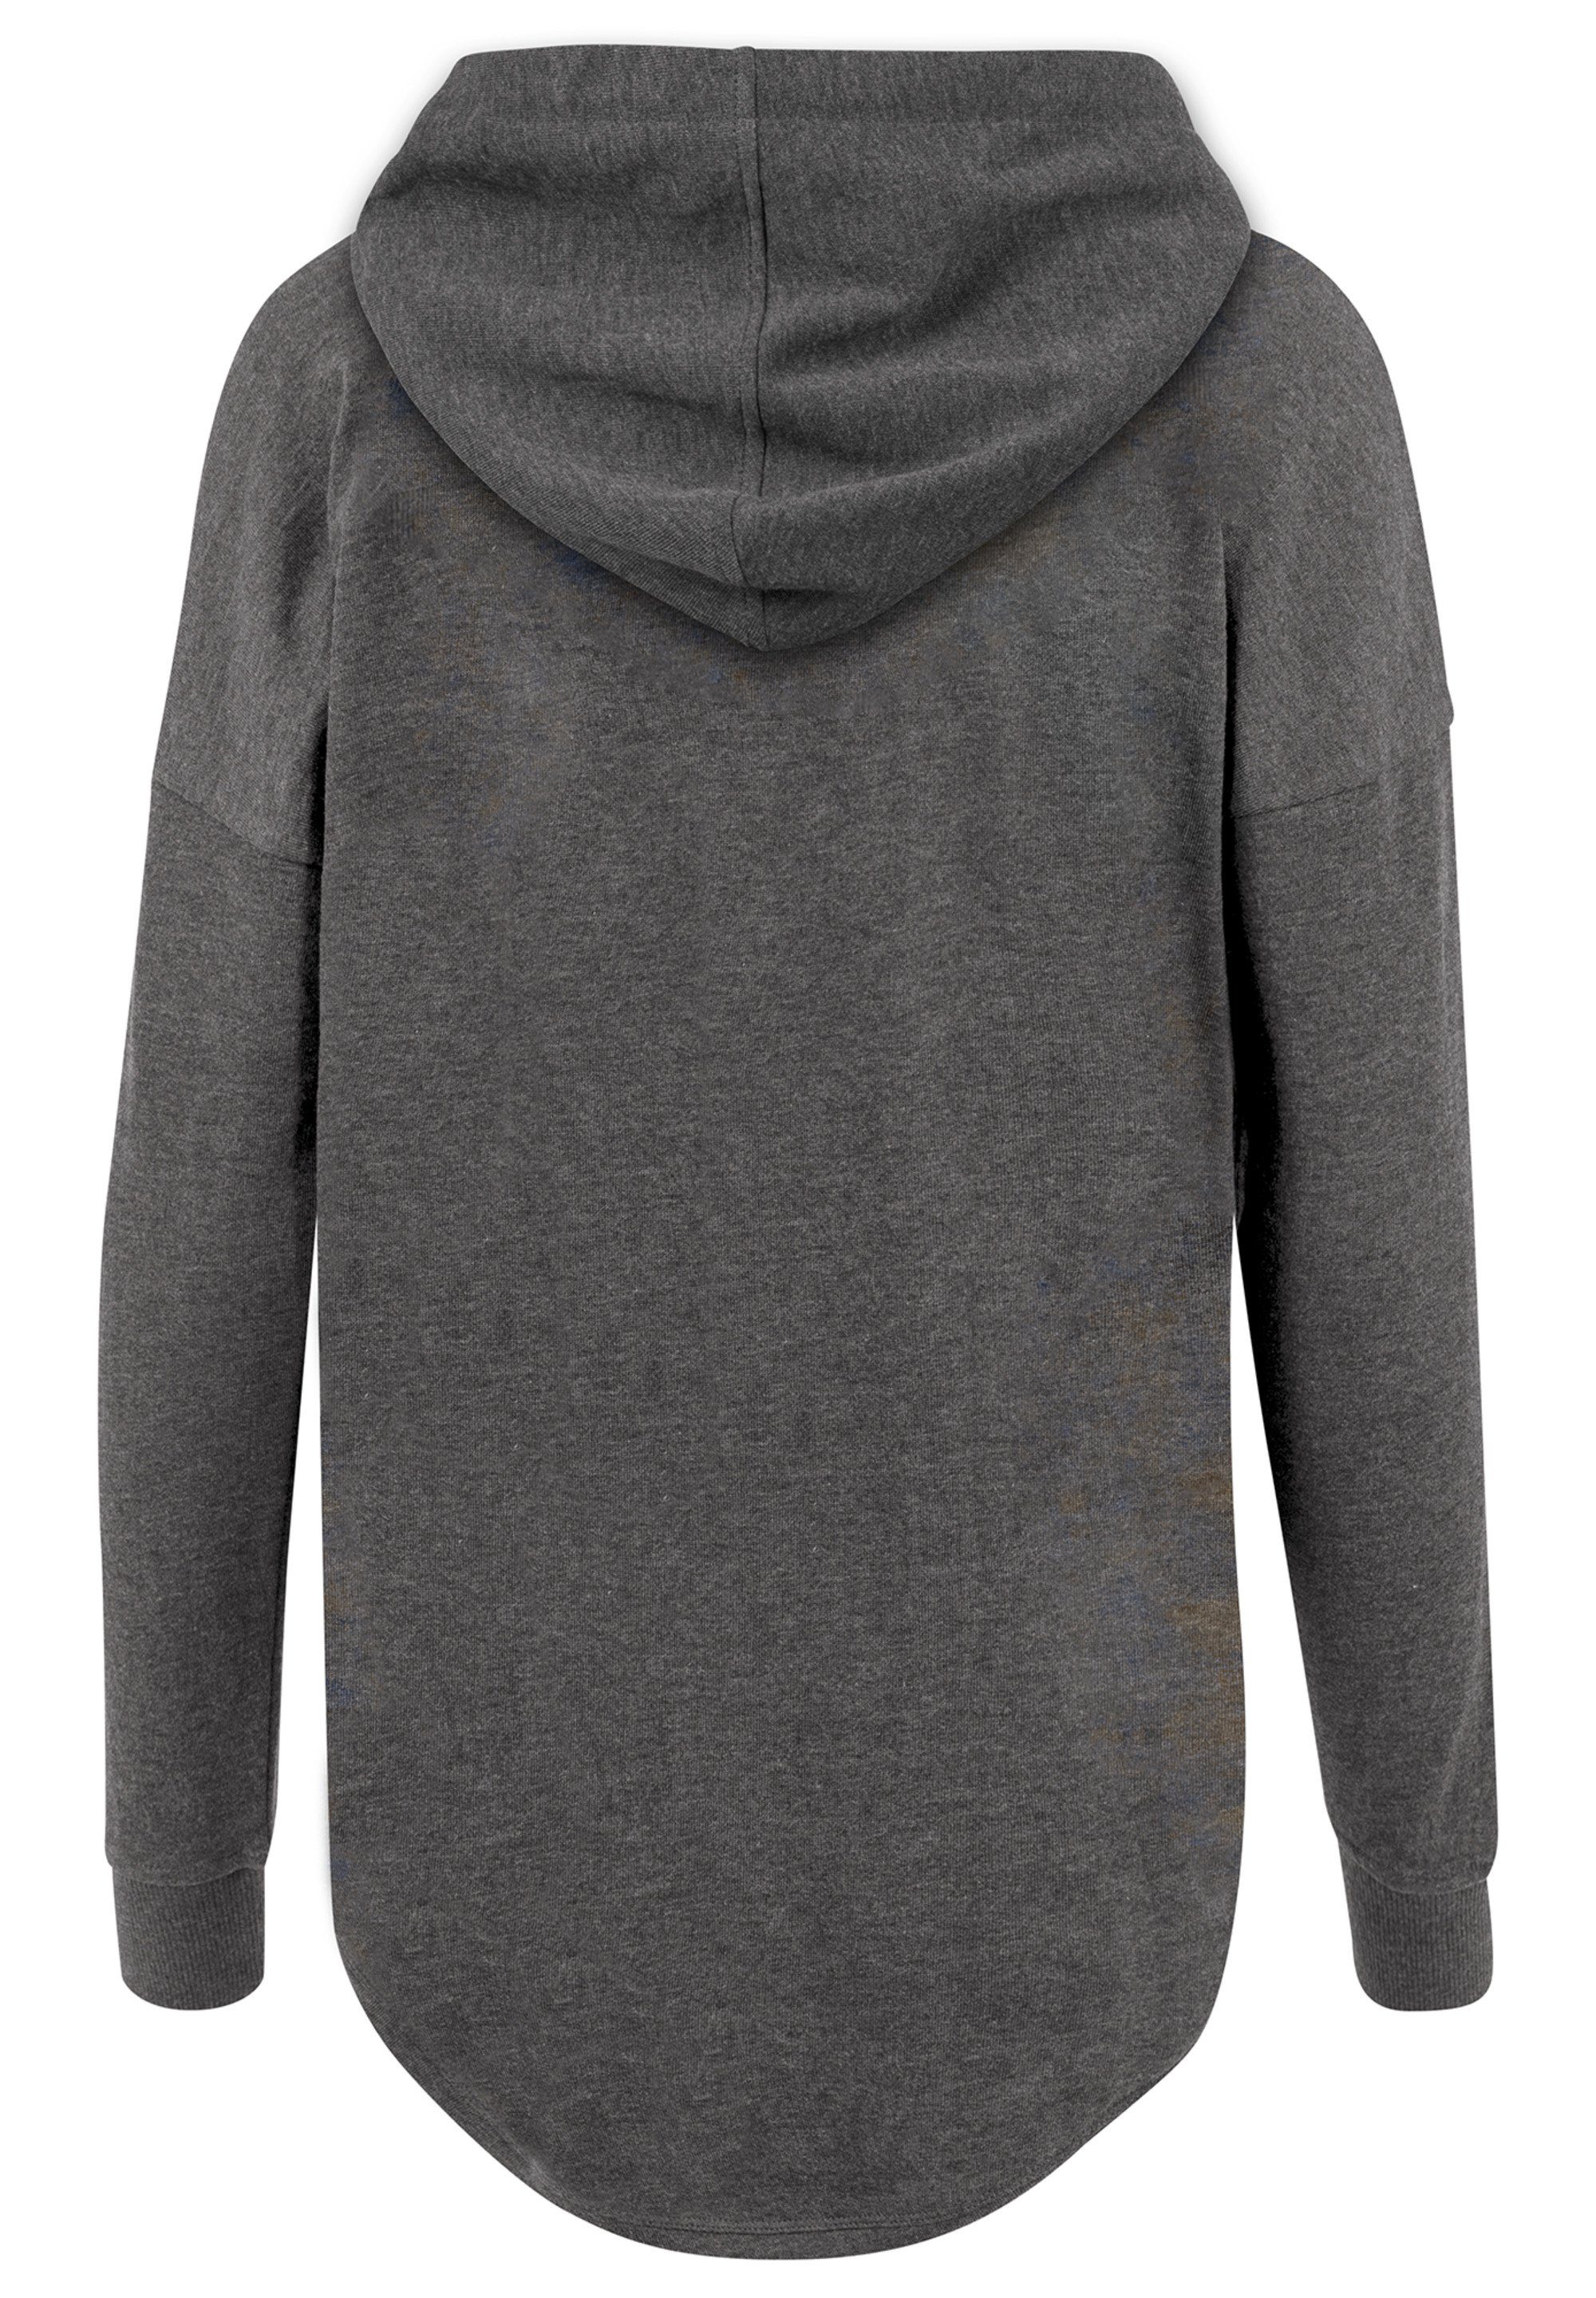 F4NT4STIC Kapuzenpullover Cities Munich Collection - charcoal Print skyline